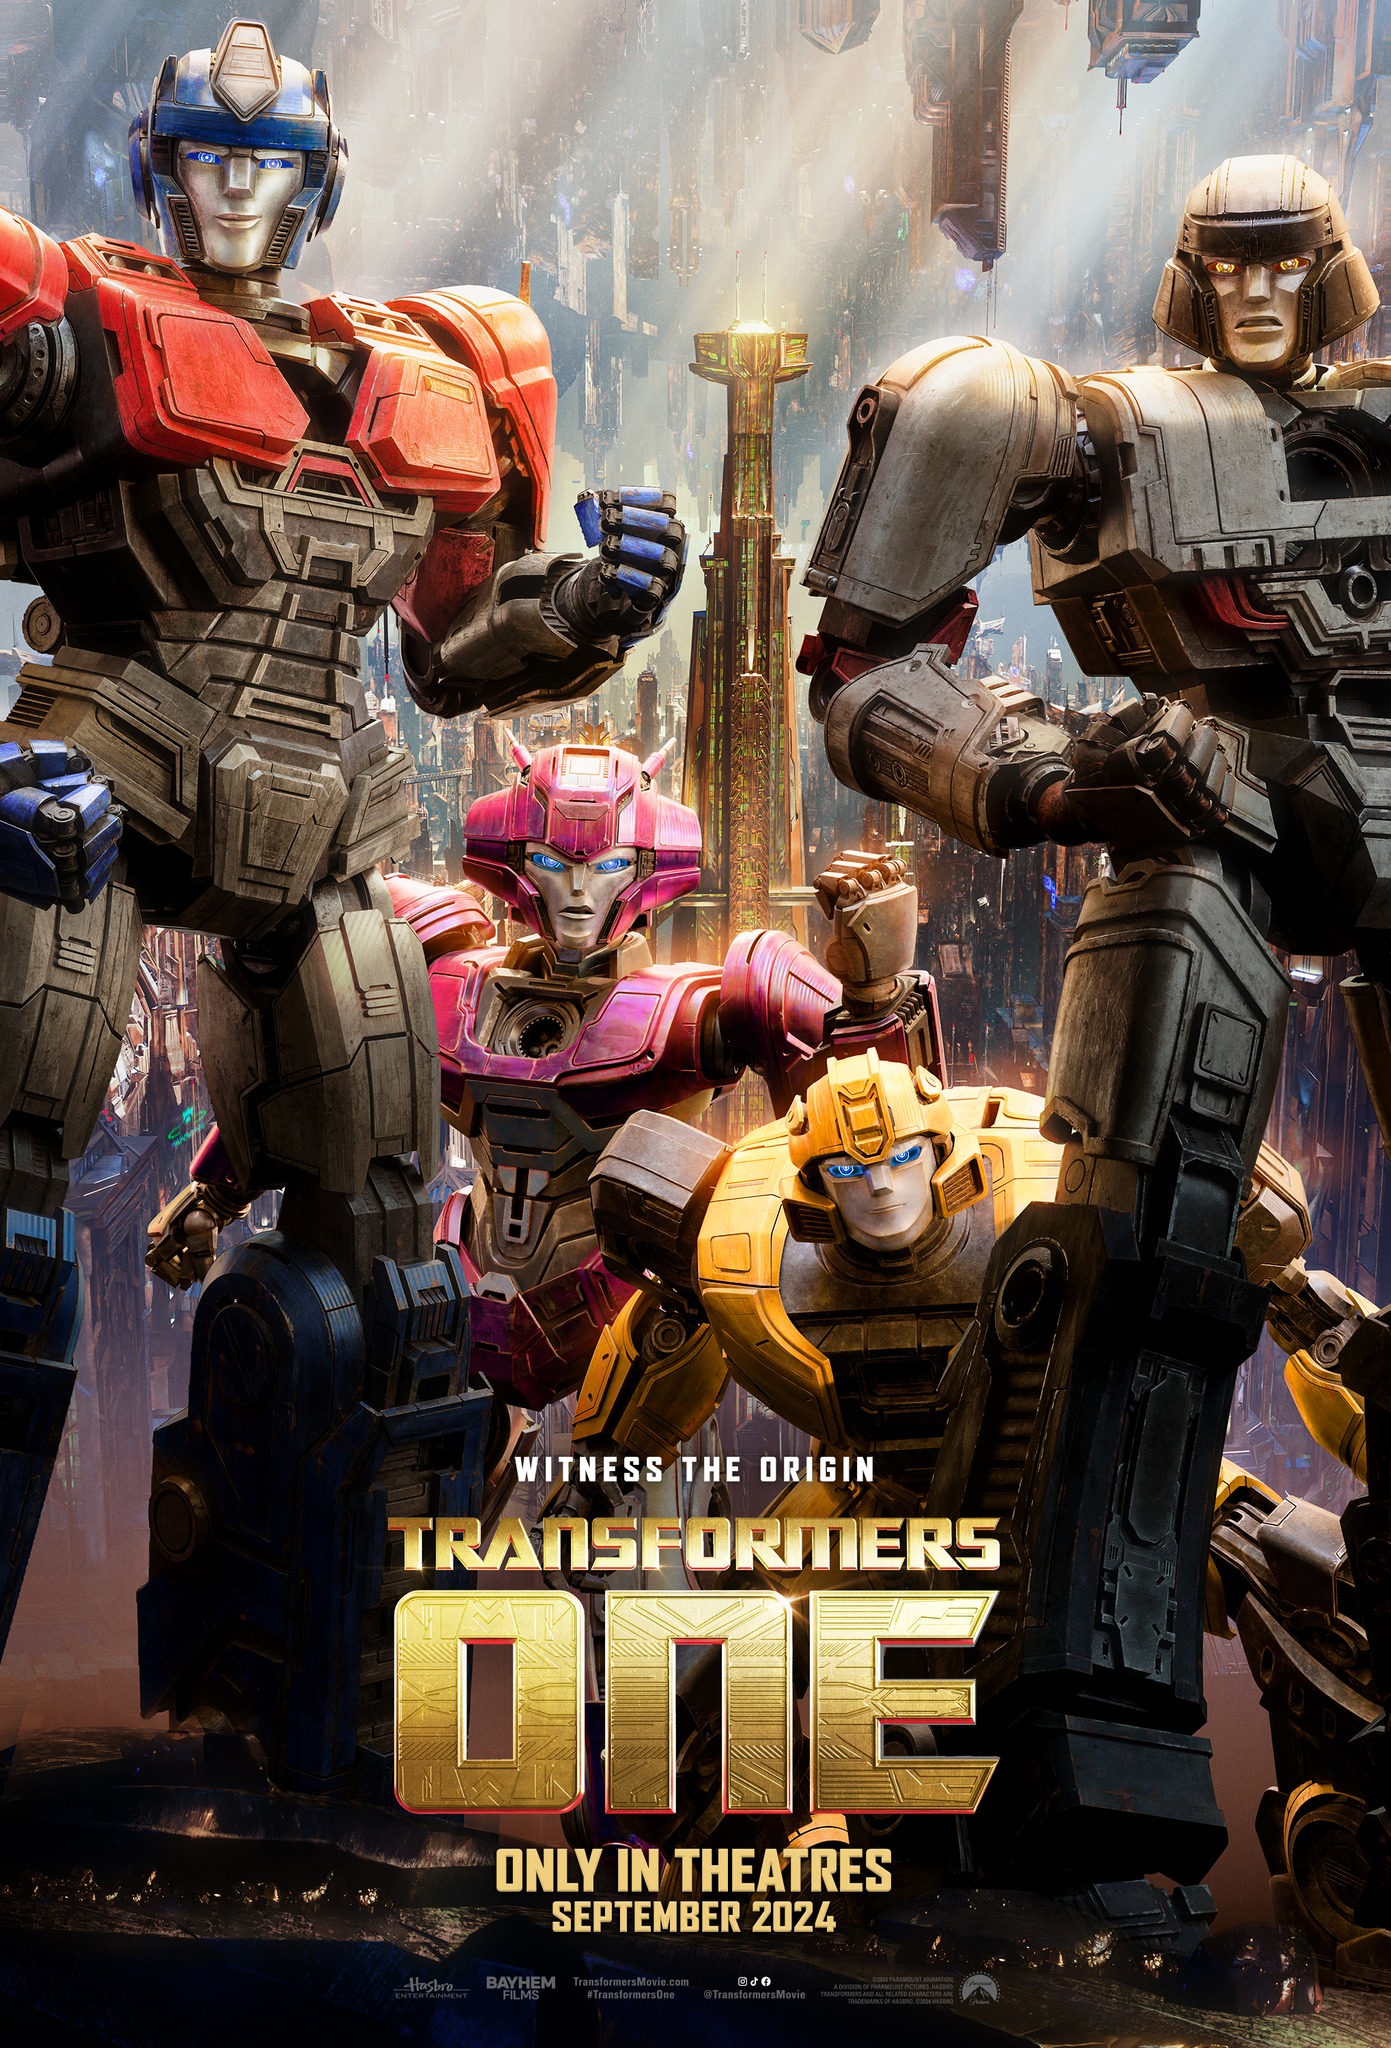 Transformers One official poster